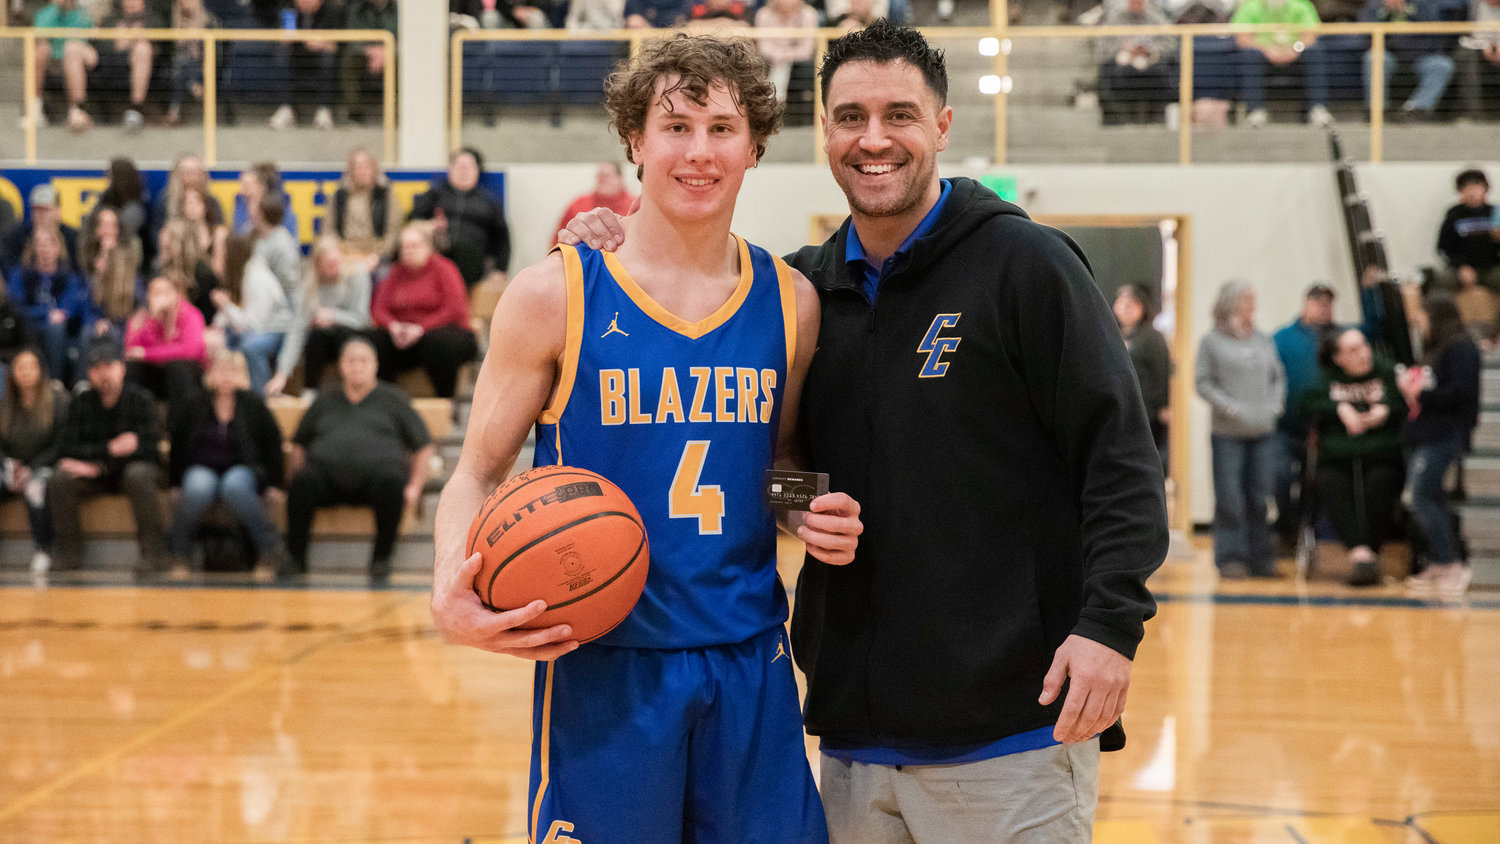 Tumwater’s Luke Brewer poses for a photo with Joe Chirhart after taking first place in a three-point competition during a Southwest Washington High School All-Star game at Centralia College Friday night.